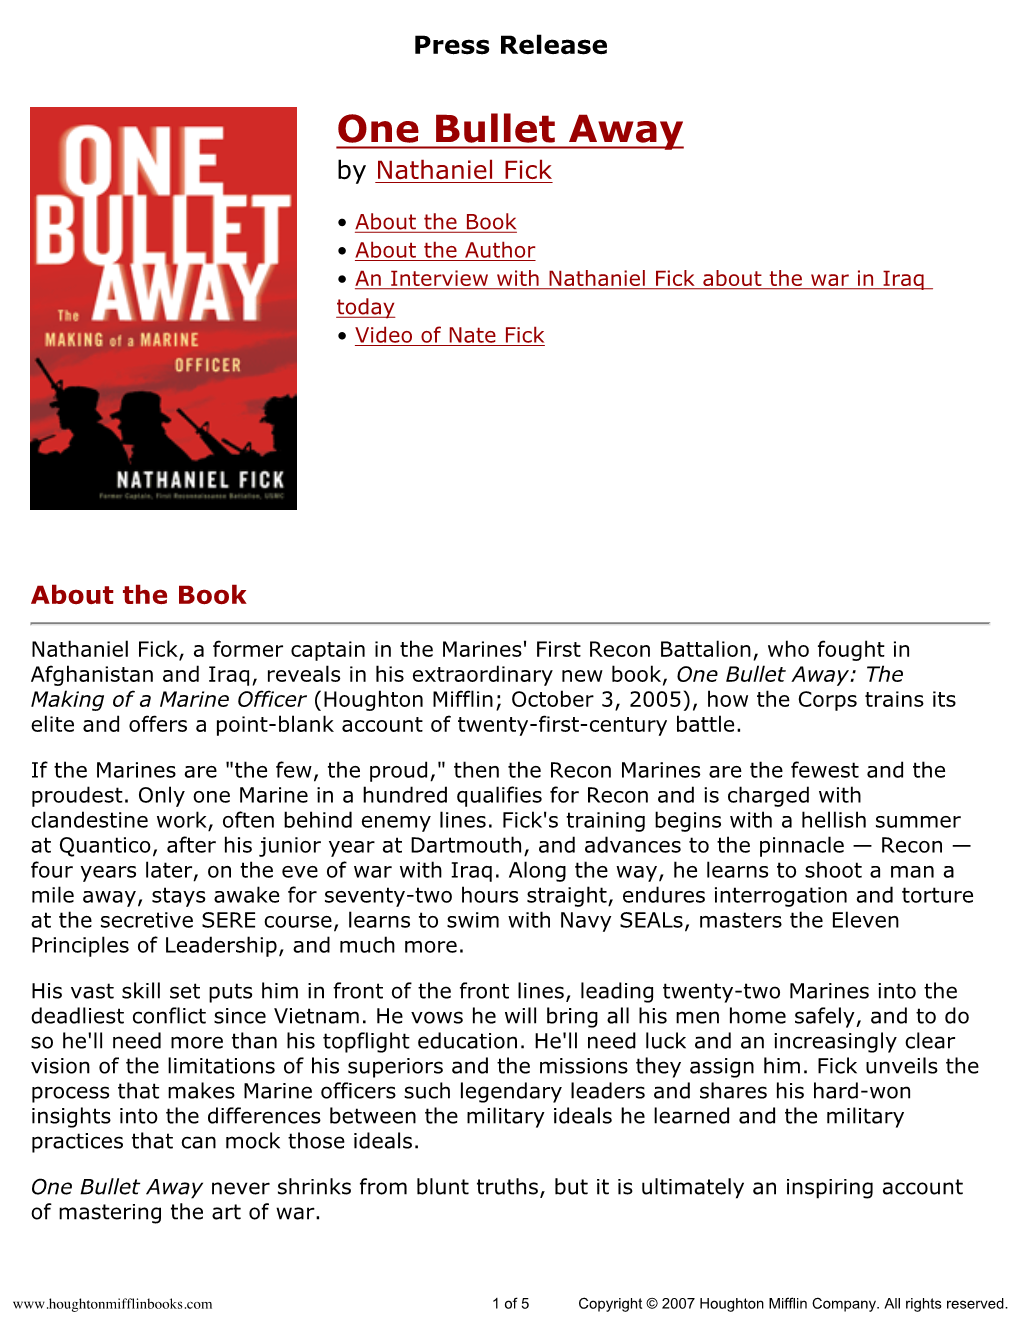 Press Release for One Bullet Away Published by Houghton Mifflin